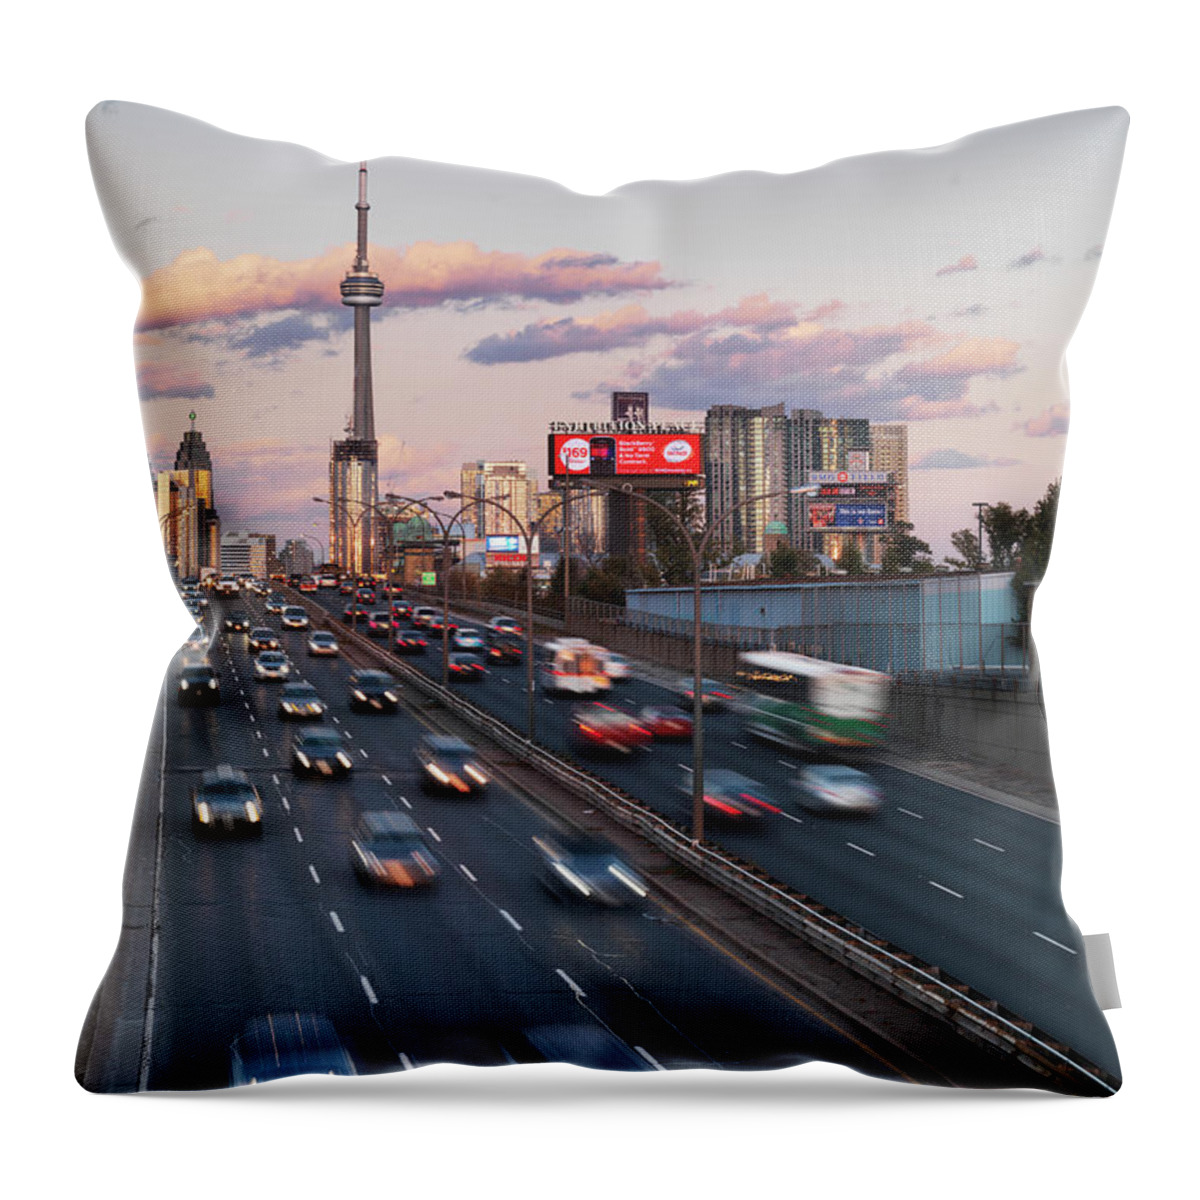 Toronto Throw Pillow featuring the photograph Gardiner Expressway Toronto by Maxim Images Exquisite Prints